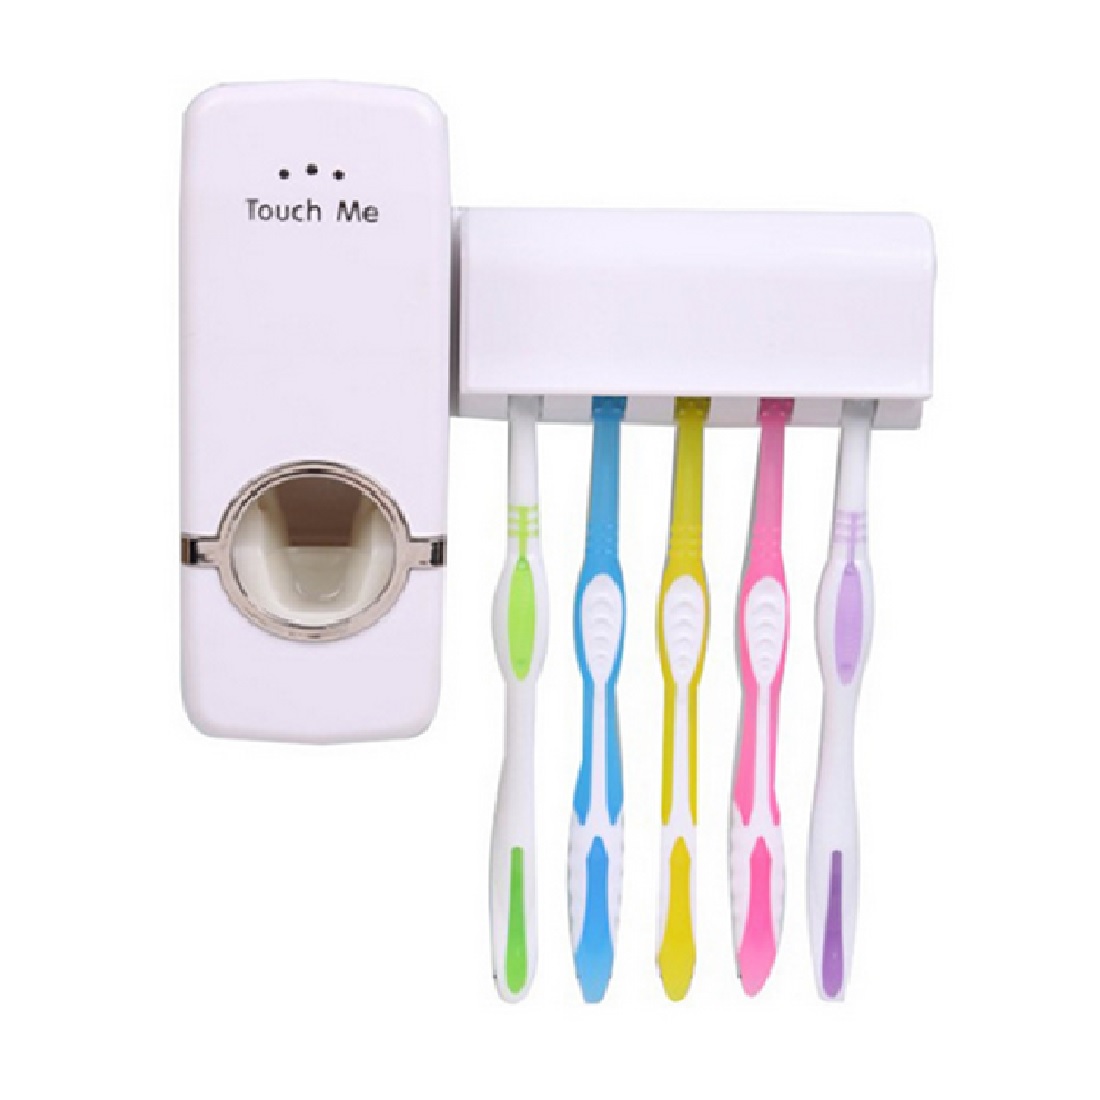 GHK H85 Toothpaste Dispenser with 5 Toothbrush Holder for Home Bathroom Usage (Wall Mount)